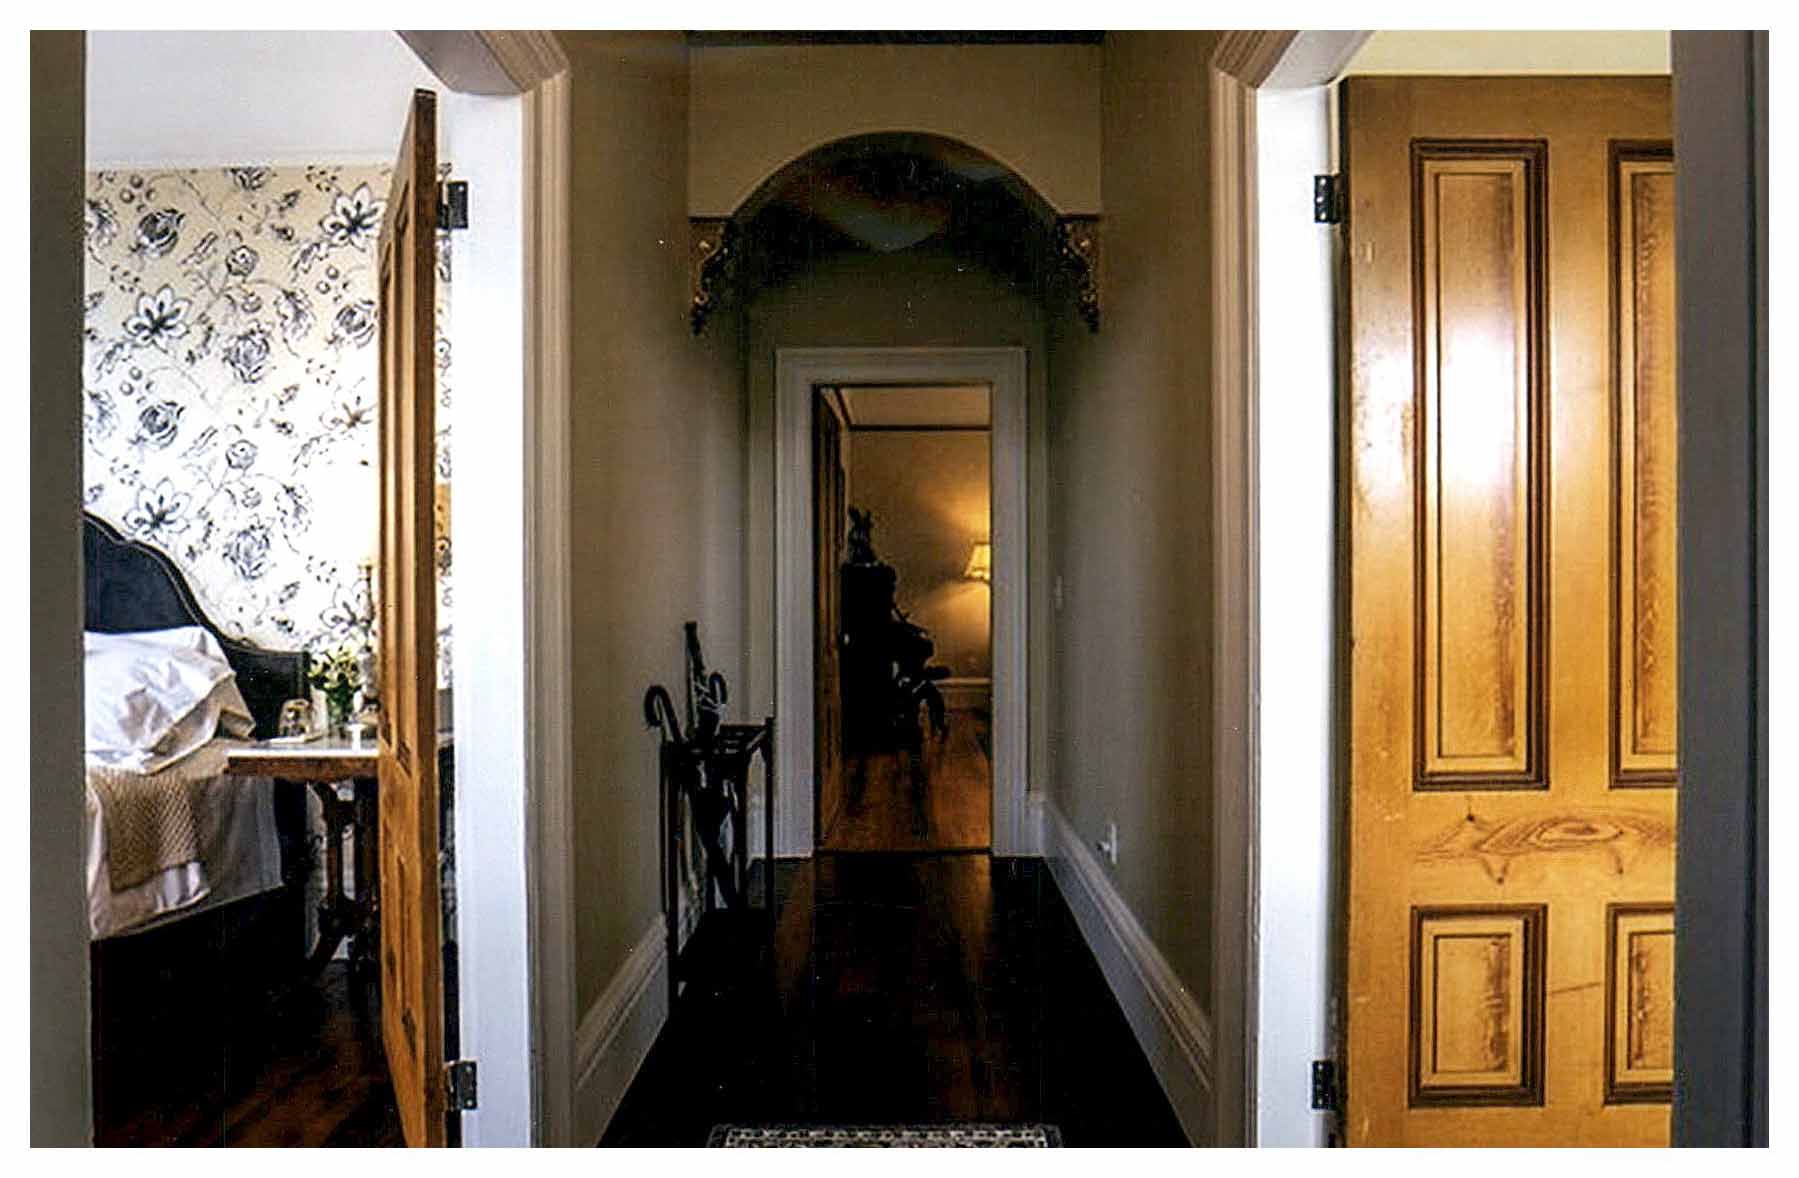 After: view of other end of entrance hallway with open room doors on both sides and repaired arch above door to rooms beyond.